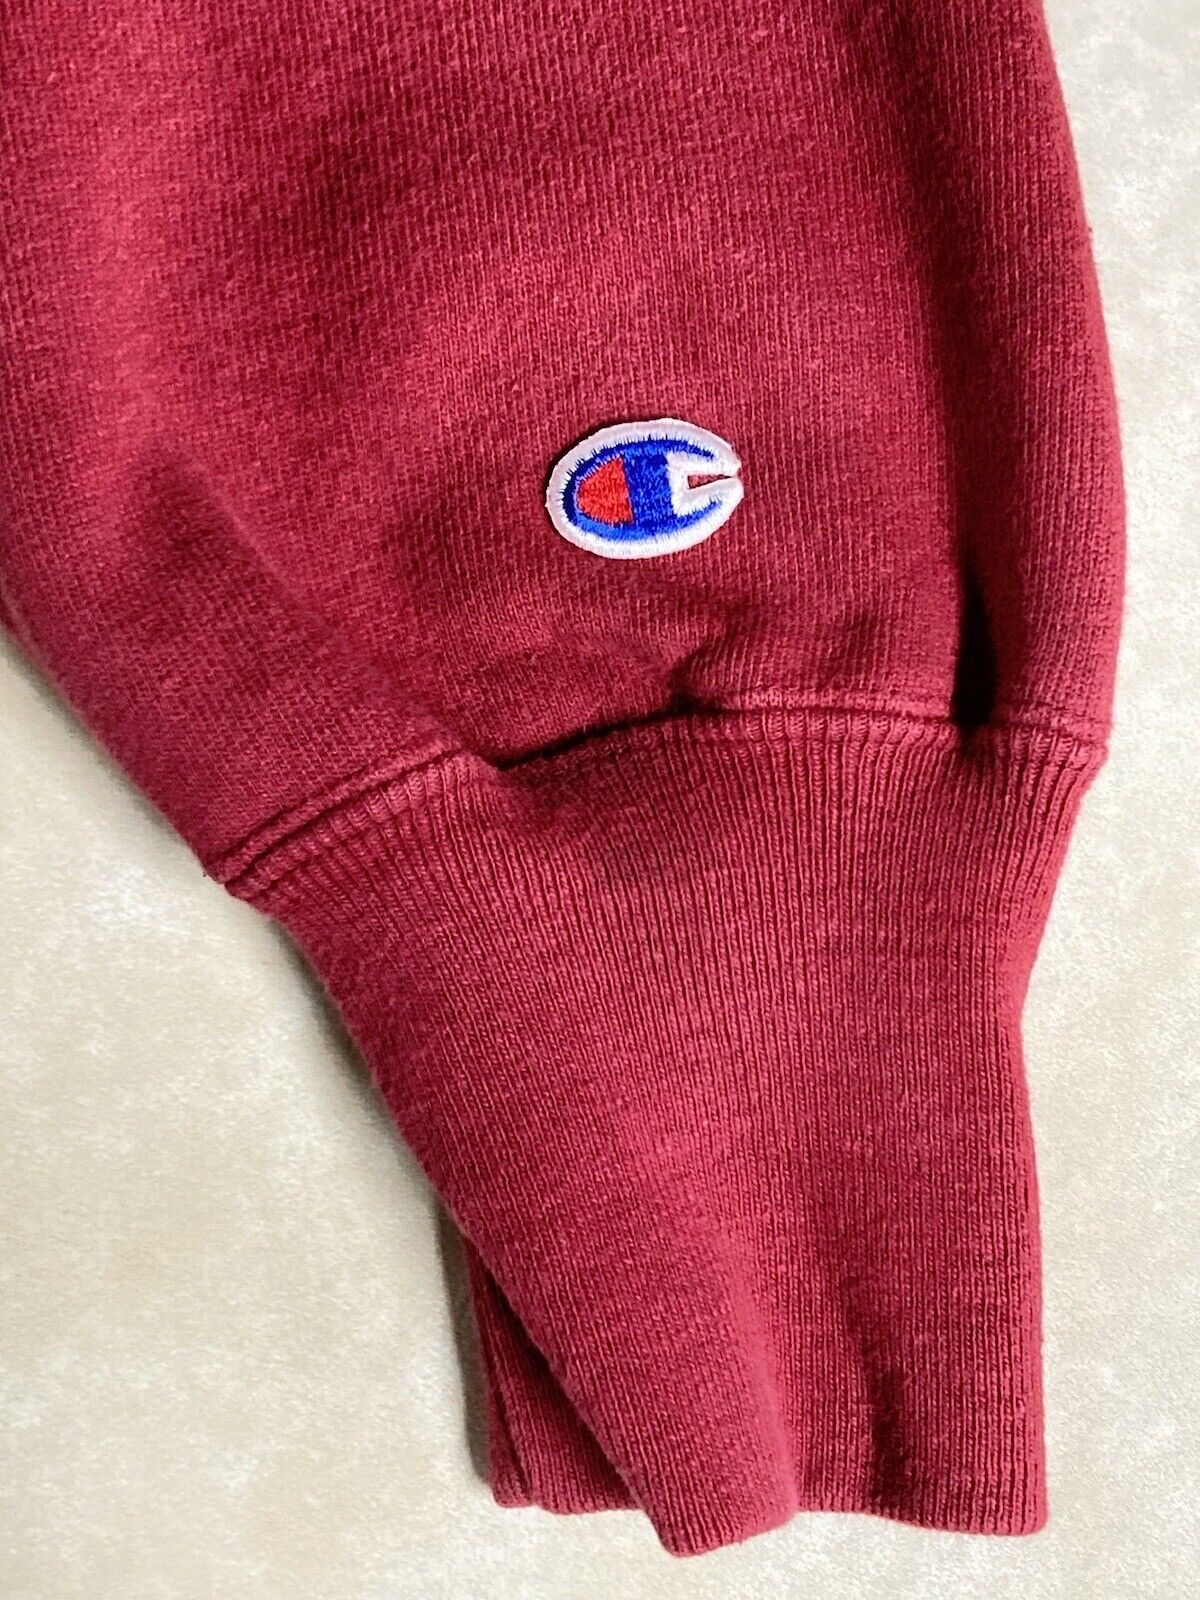 Vintage 90s Champion Reverse Weave Blank Pullover… - image 6